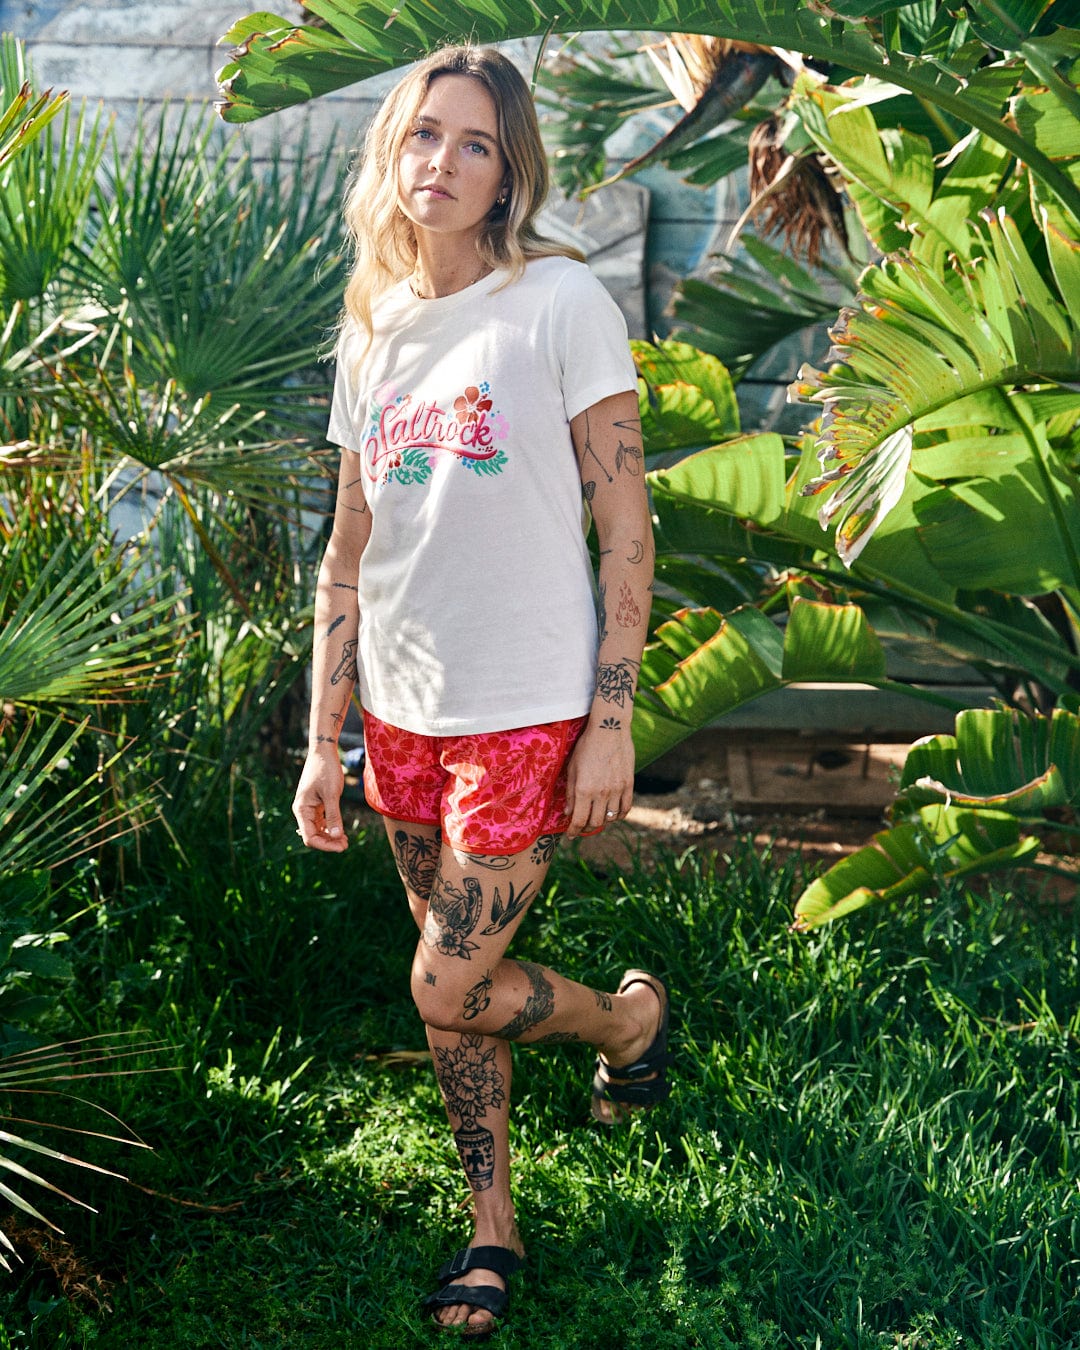 Woman with tattoos standing in a garden, wearing a white t-shirt and Saltrock Hibiscus Womens Boardshorts in Red/Pink with an elasticated drawstring waist, looking at the camera.